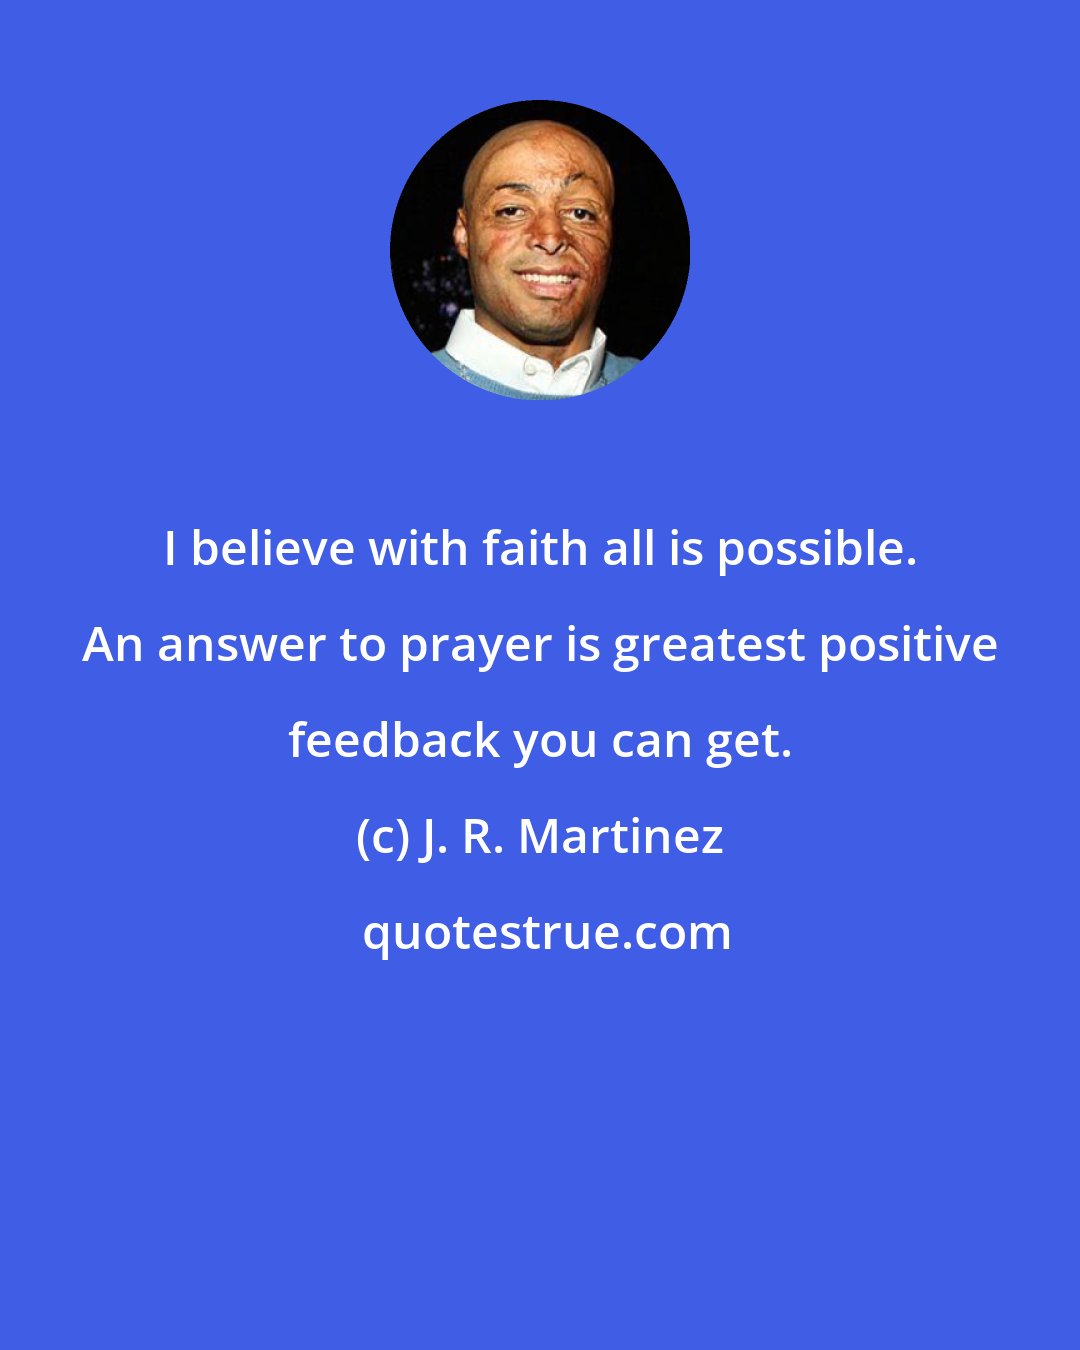 J. R. Martinez: I believe with faith all is possible. An answer to prayer is greatest positive feedback you can get.